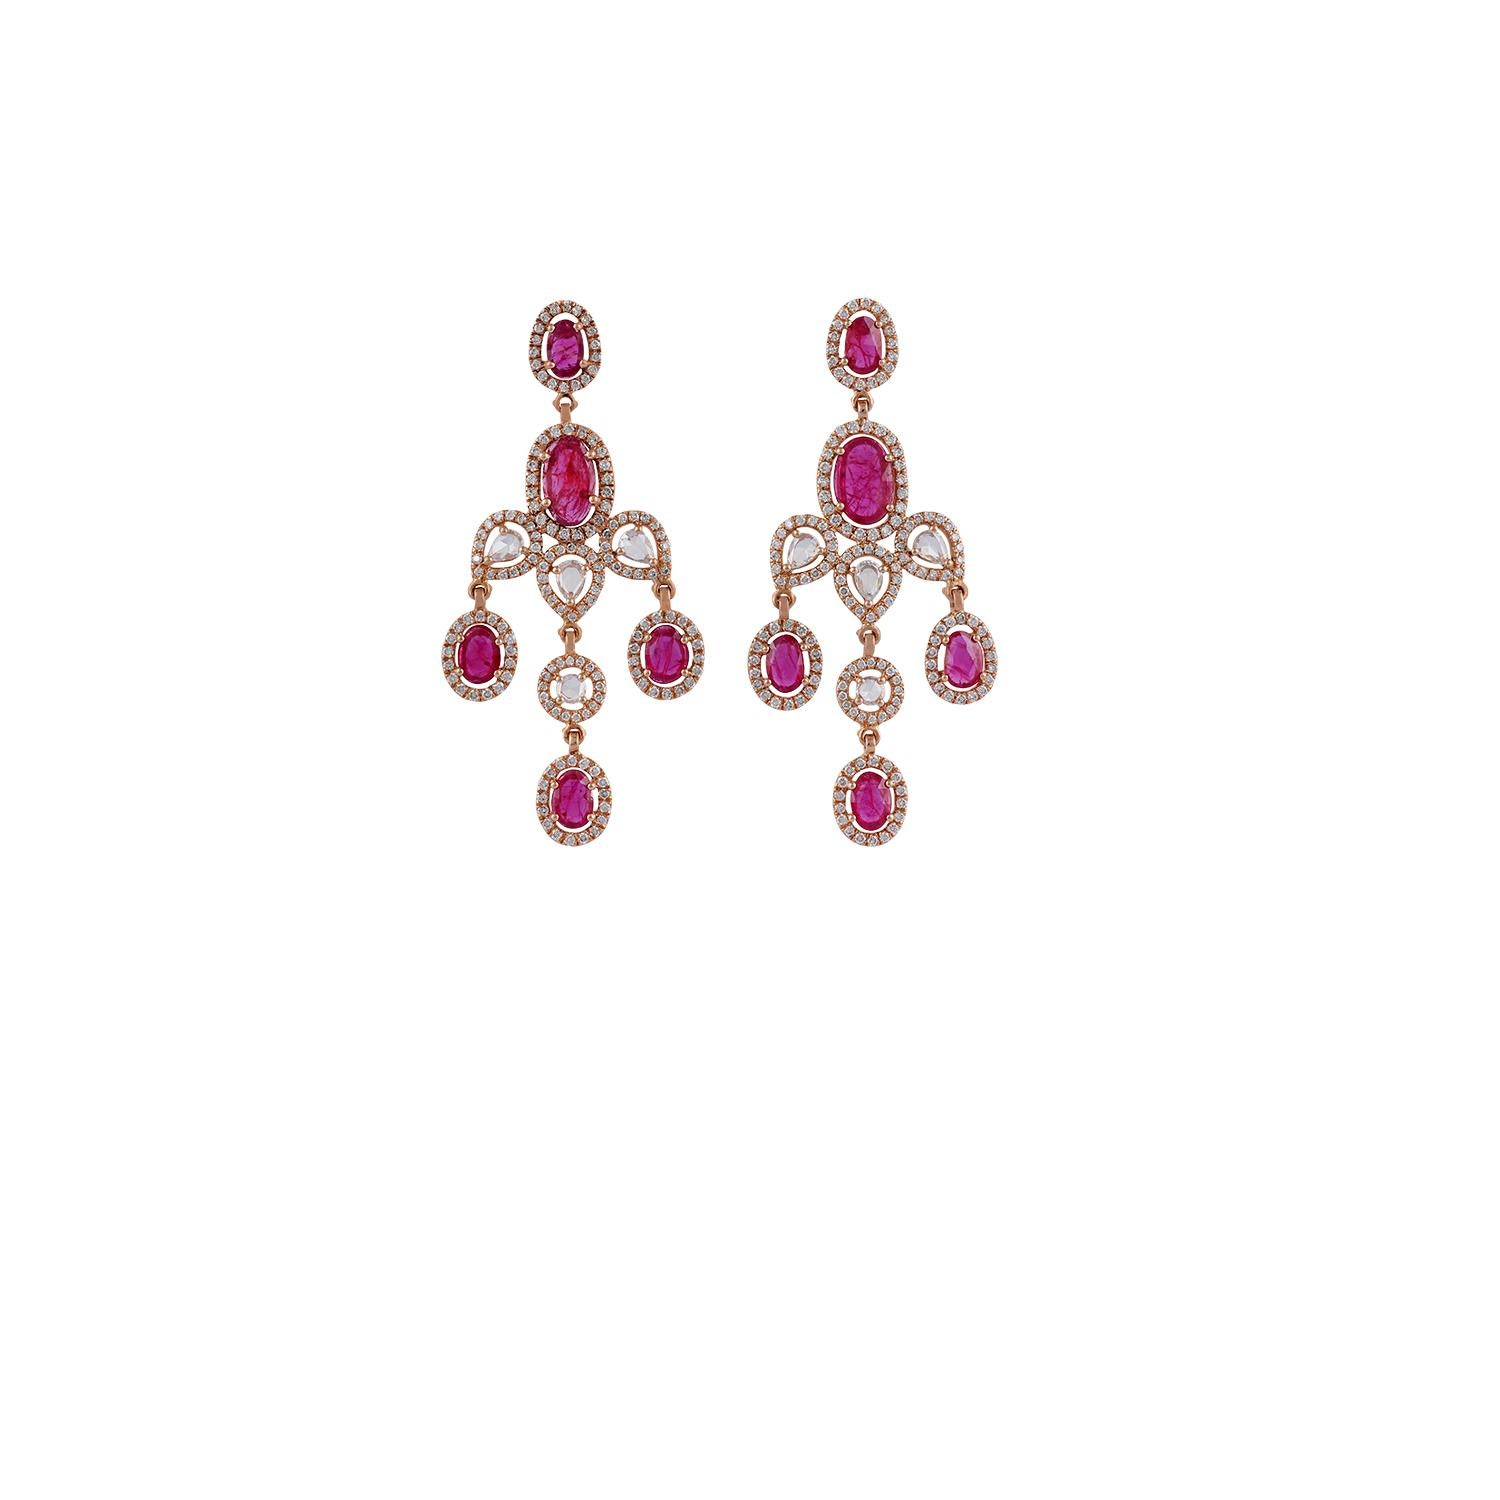 This is an exclusive ruby & diamond earrings feature 10 pieces of rose-cut Mozambique rubies weight 3.48 carats, 8 pieces of rose-cut diamonds weight 0.62 carat & 313 pieces of round brilliant cut diamonds weight 1.75 carats around the rubies in the